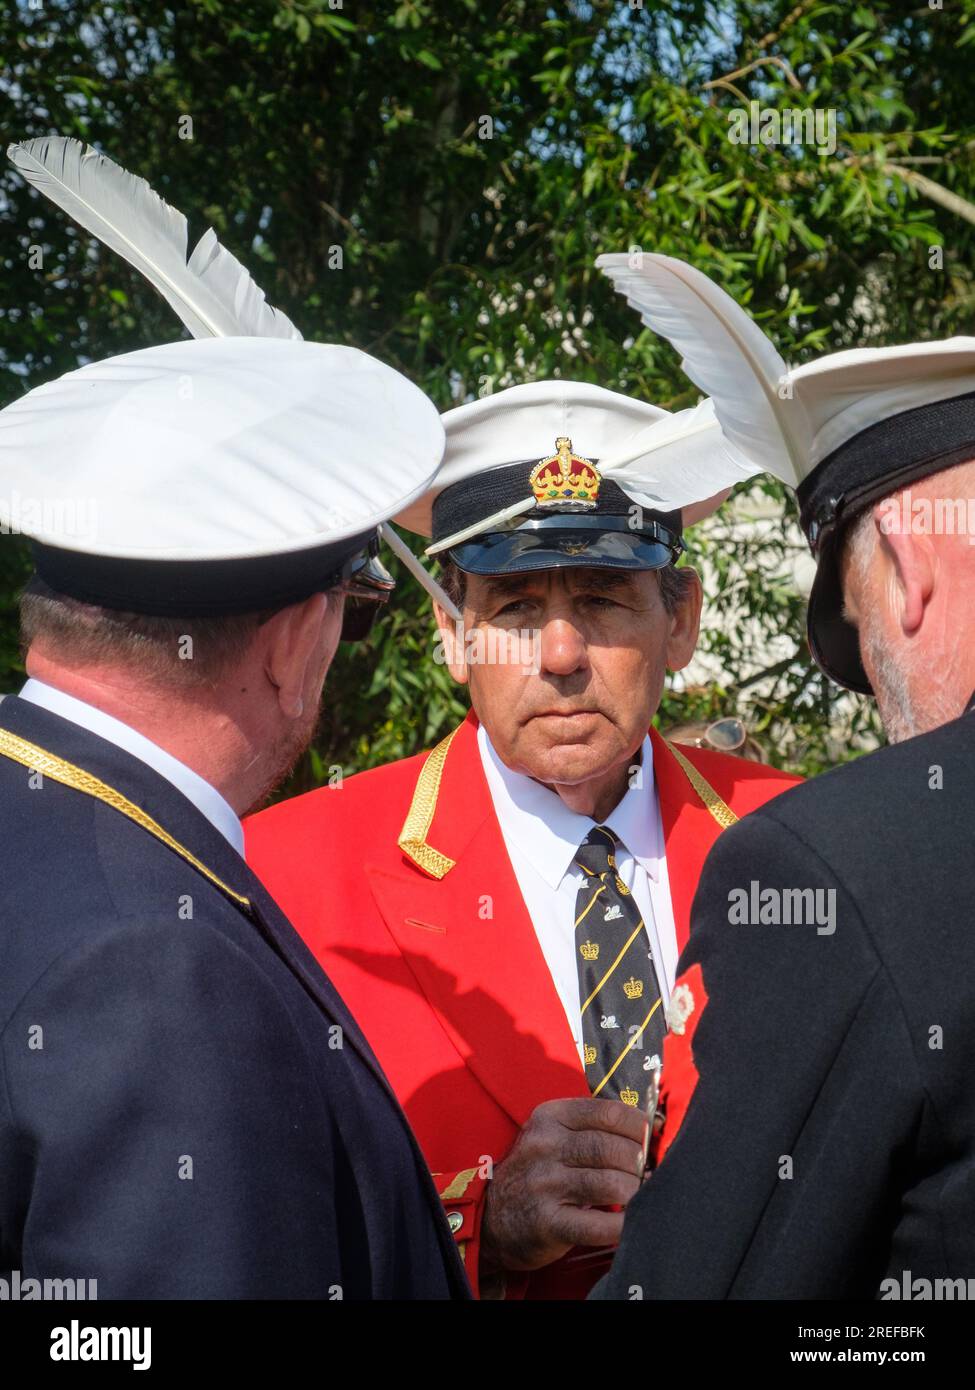 The Kings's Swan Marker, David Barber MVO, at the annual Swan Upping on the River Thames, 2023 with a white Swan's feather in his cap Stock Photo